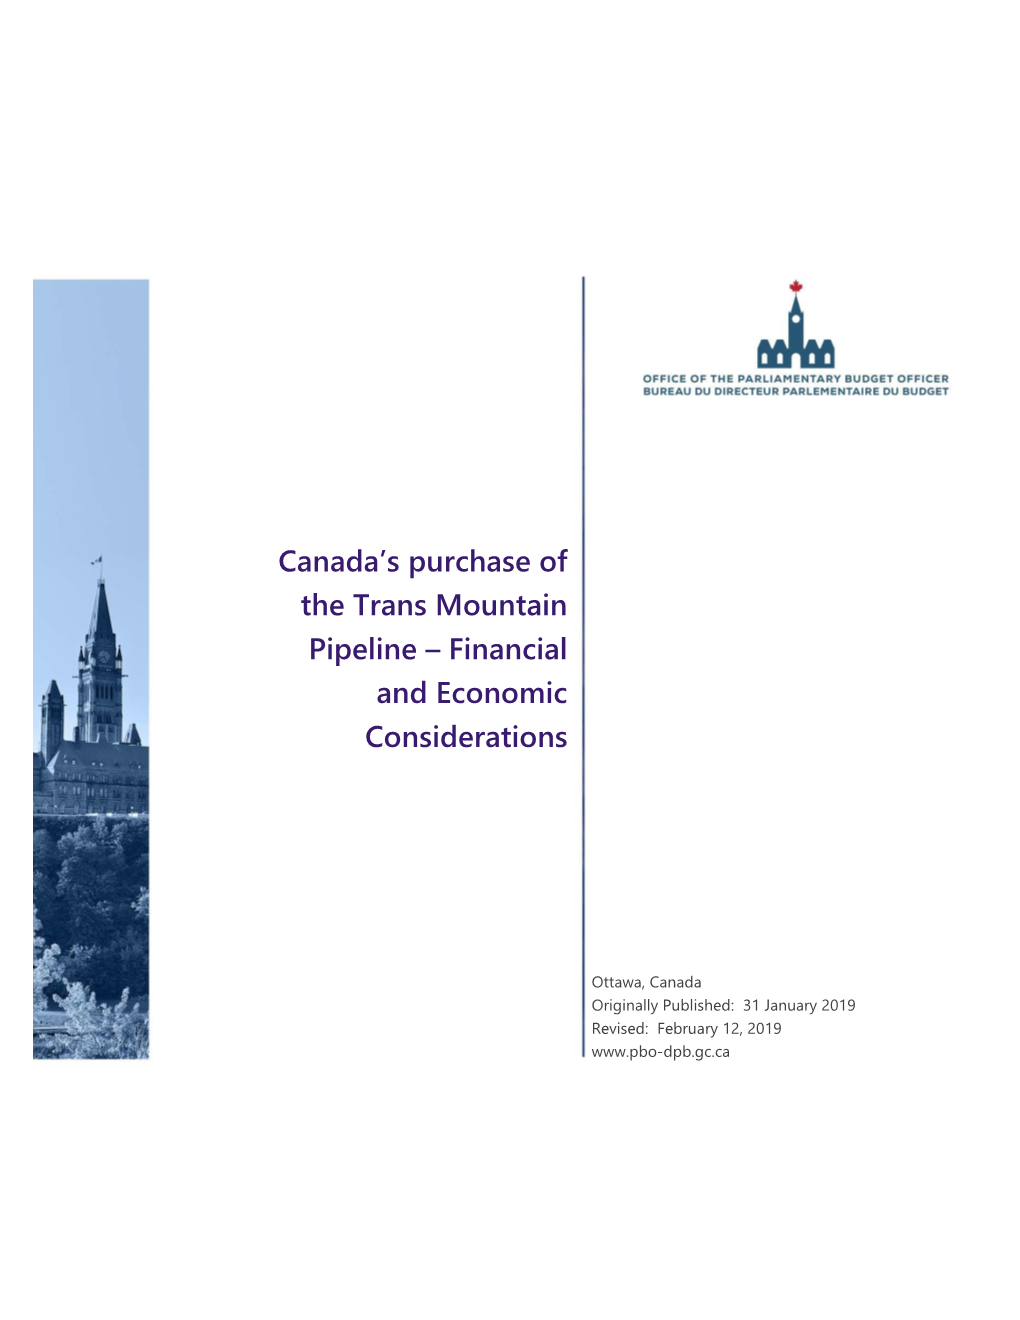 Canada's Purchase of the Trans Mountain Pipeline